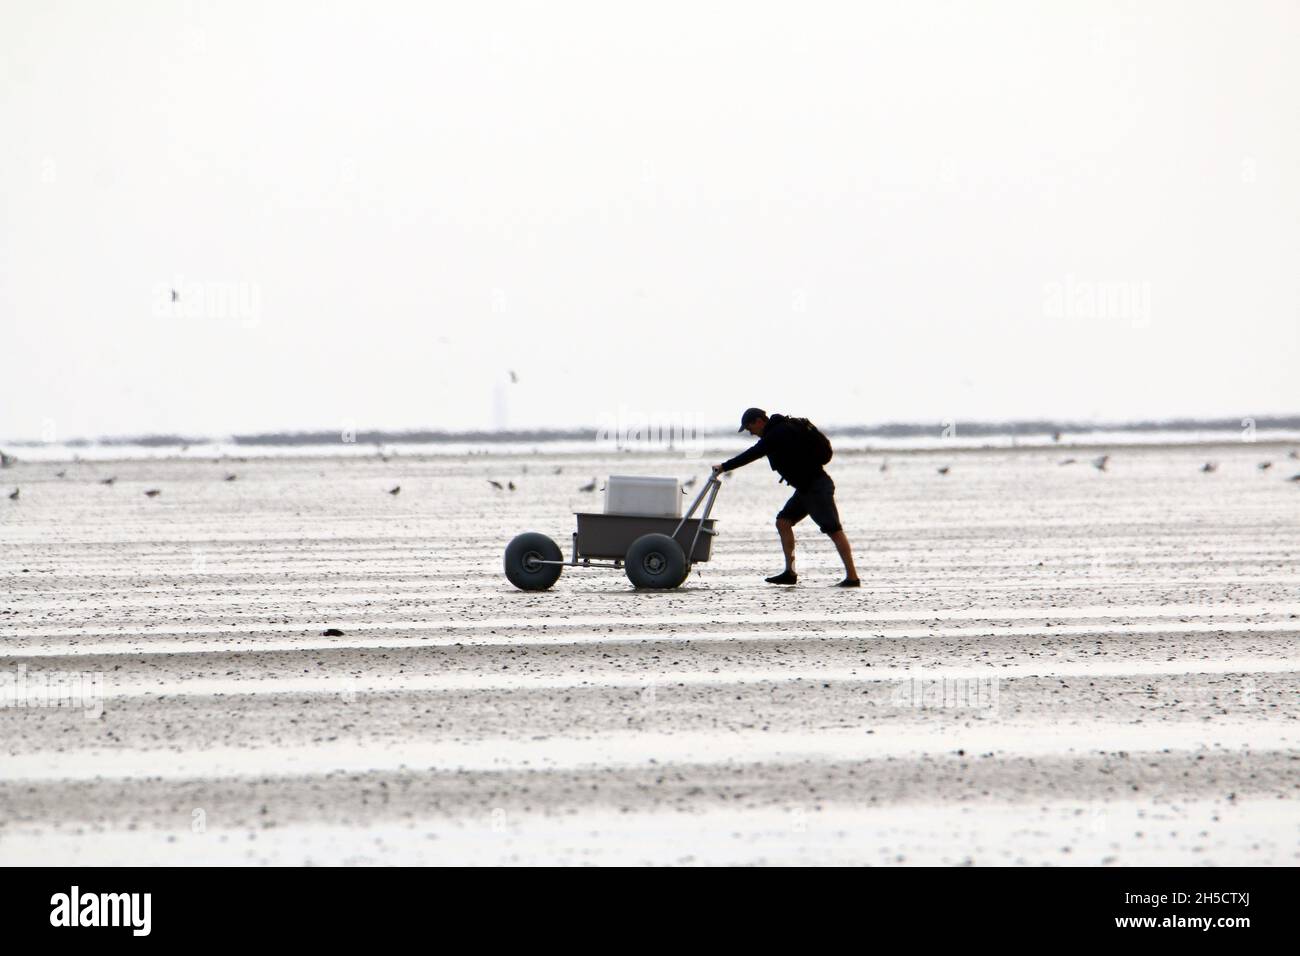 birdwatcher with trolley in the wadden sea, Germany, Lower Saxony Wadden Sea National Park Stock Photo